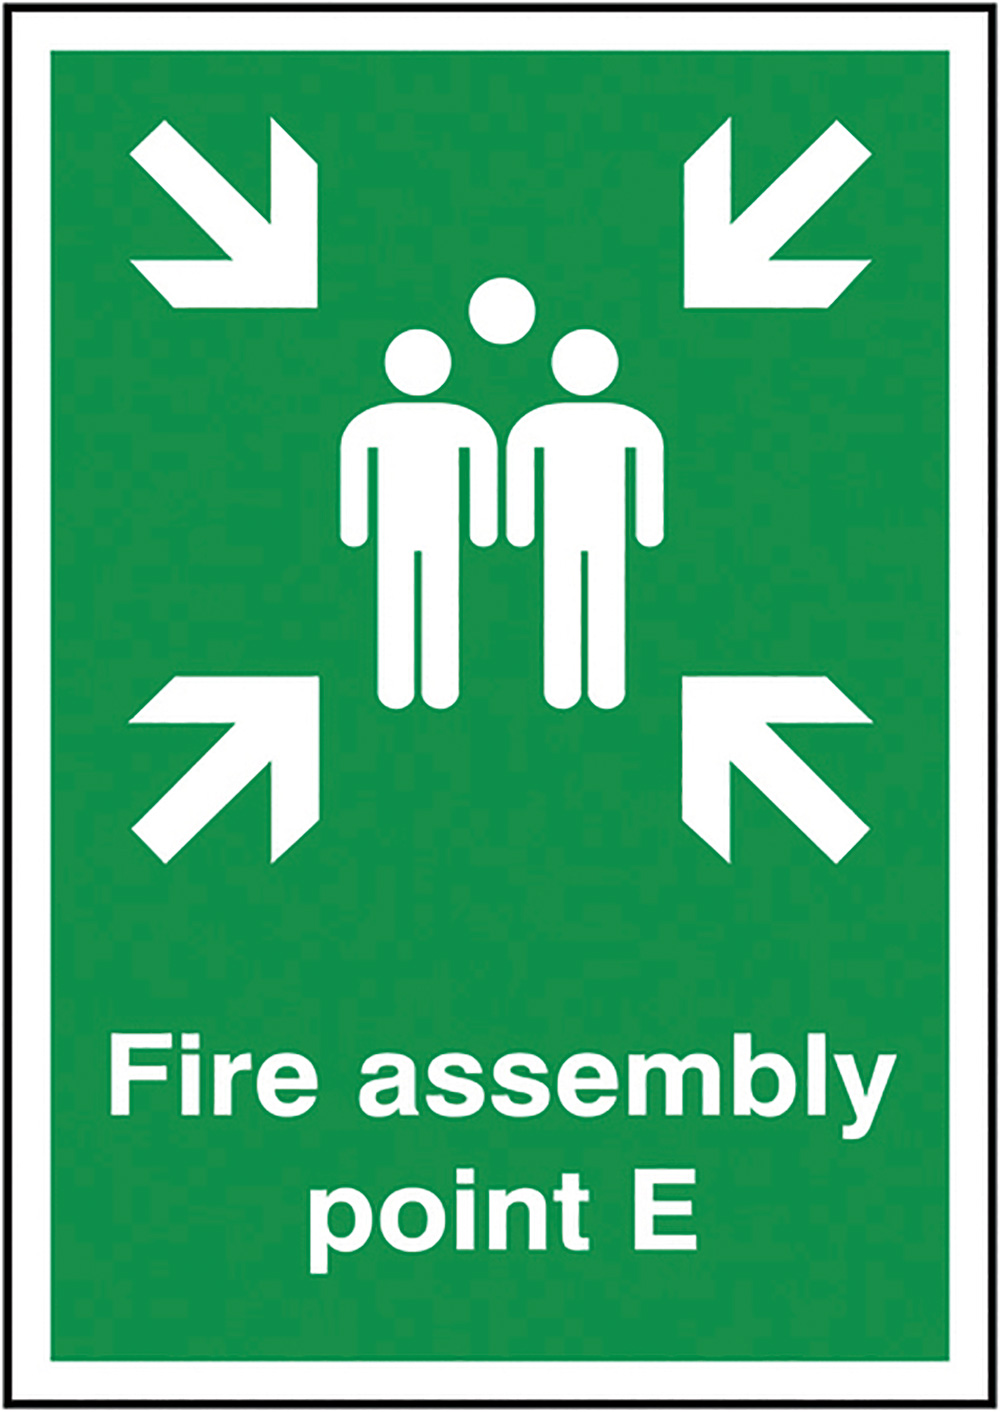 Fire Assembly Point E  297x210mm Self Adhesive Vinyl Safety Sign  